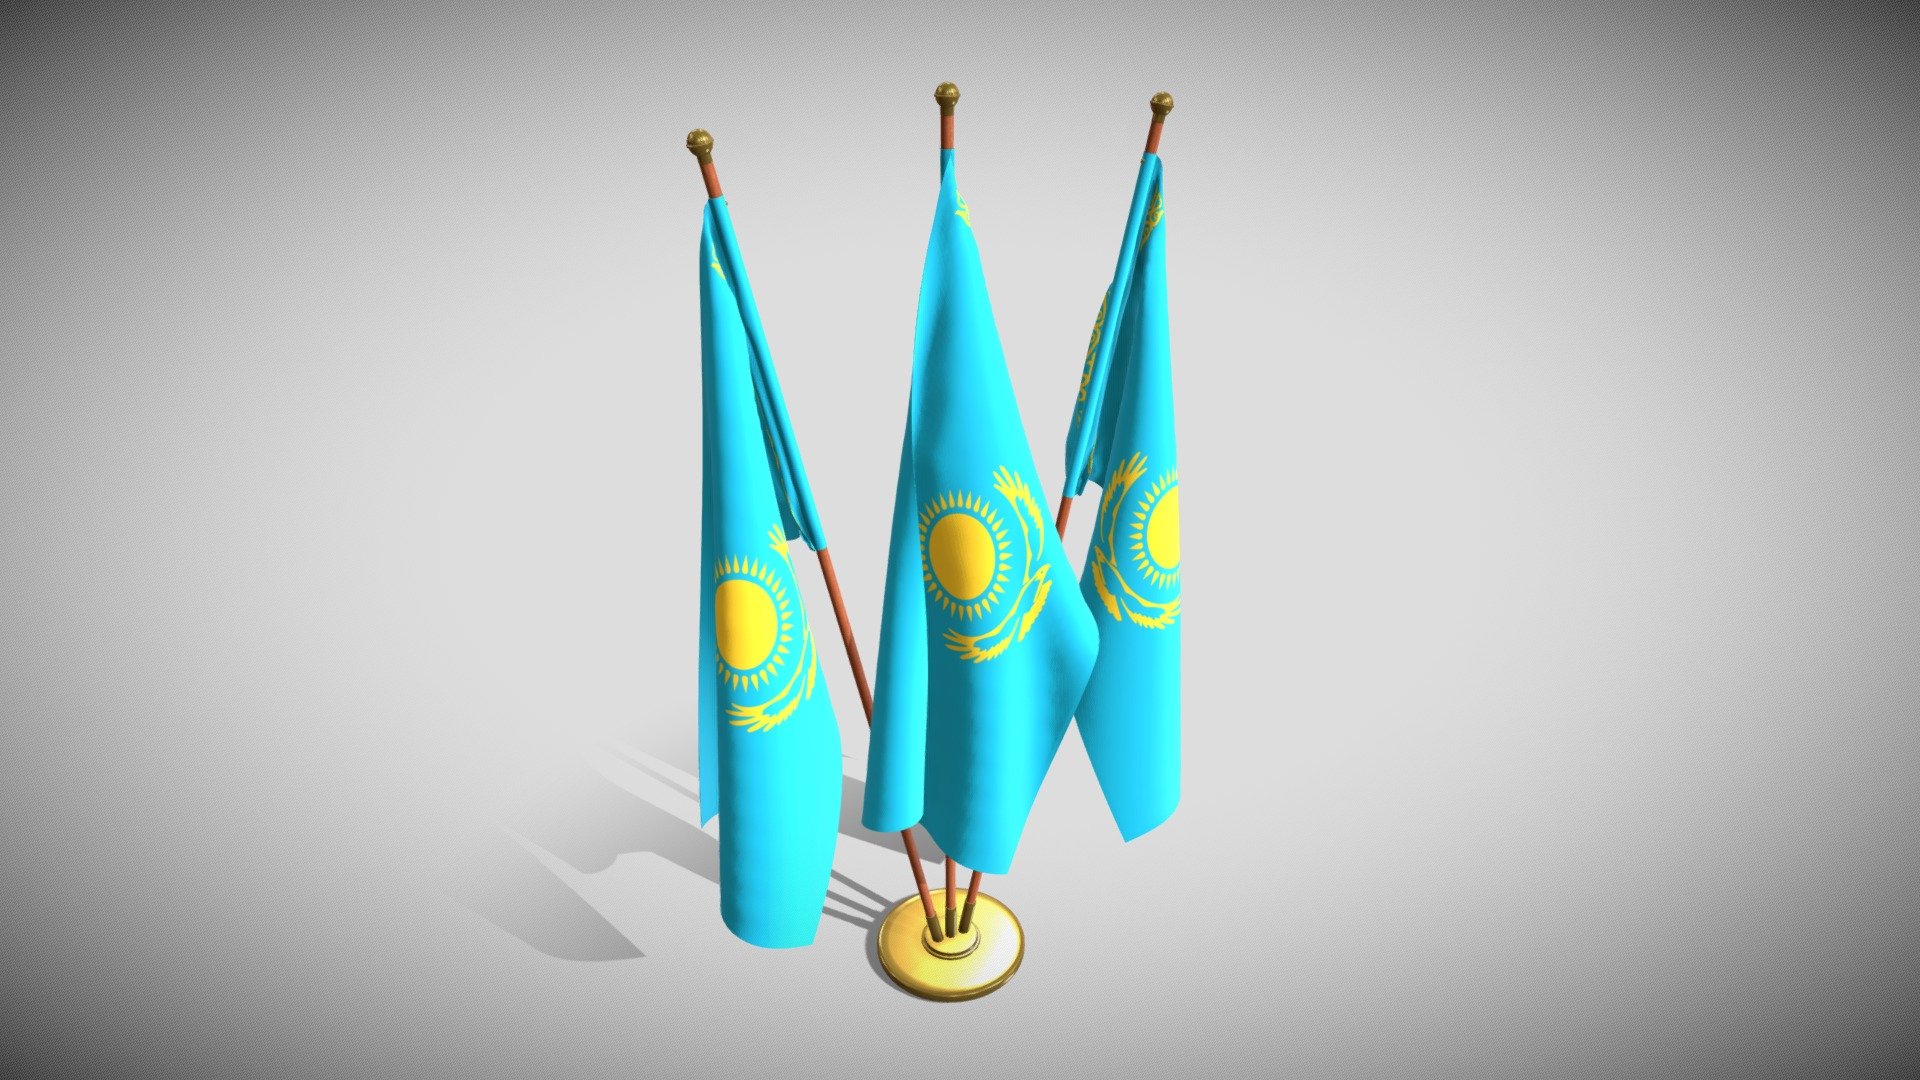 Set of four flag setups(exterior flag and three different office flags).

File formats:
-.blend, rendered with cycles, as seen in the images;
-.obj, with materials applied and textures;
-.dae, with materials applied and textures;
-.fbx, with material slots applied;
-.stl;

3D Software:
This 3d model was originally created in Blender 2.79 and rendered with Cycles.

Materials and textures:
The model has materials applied in all formats, and is ready to import and render . The model comes with multiple png image textures.

Preview scenes:
The preview images are rendered in Blender using its built-in render engine &lsquo;Cycles'.
Note that the blend files come directly with the rendering scene included and the render command will generate the exact result as seen in previews.
The flags are on different layer each for convenience. For each format there are separate files for each of the four flag setups 3d model